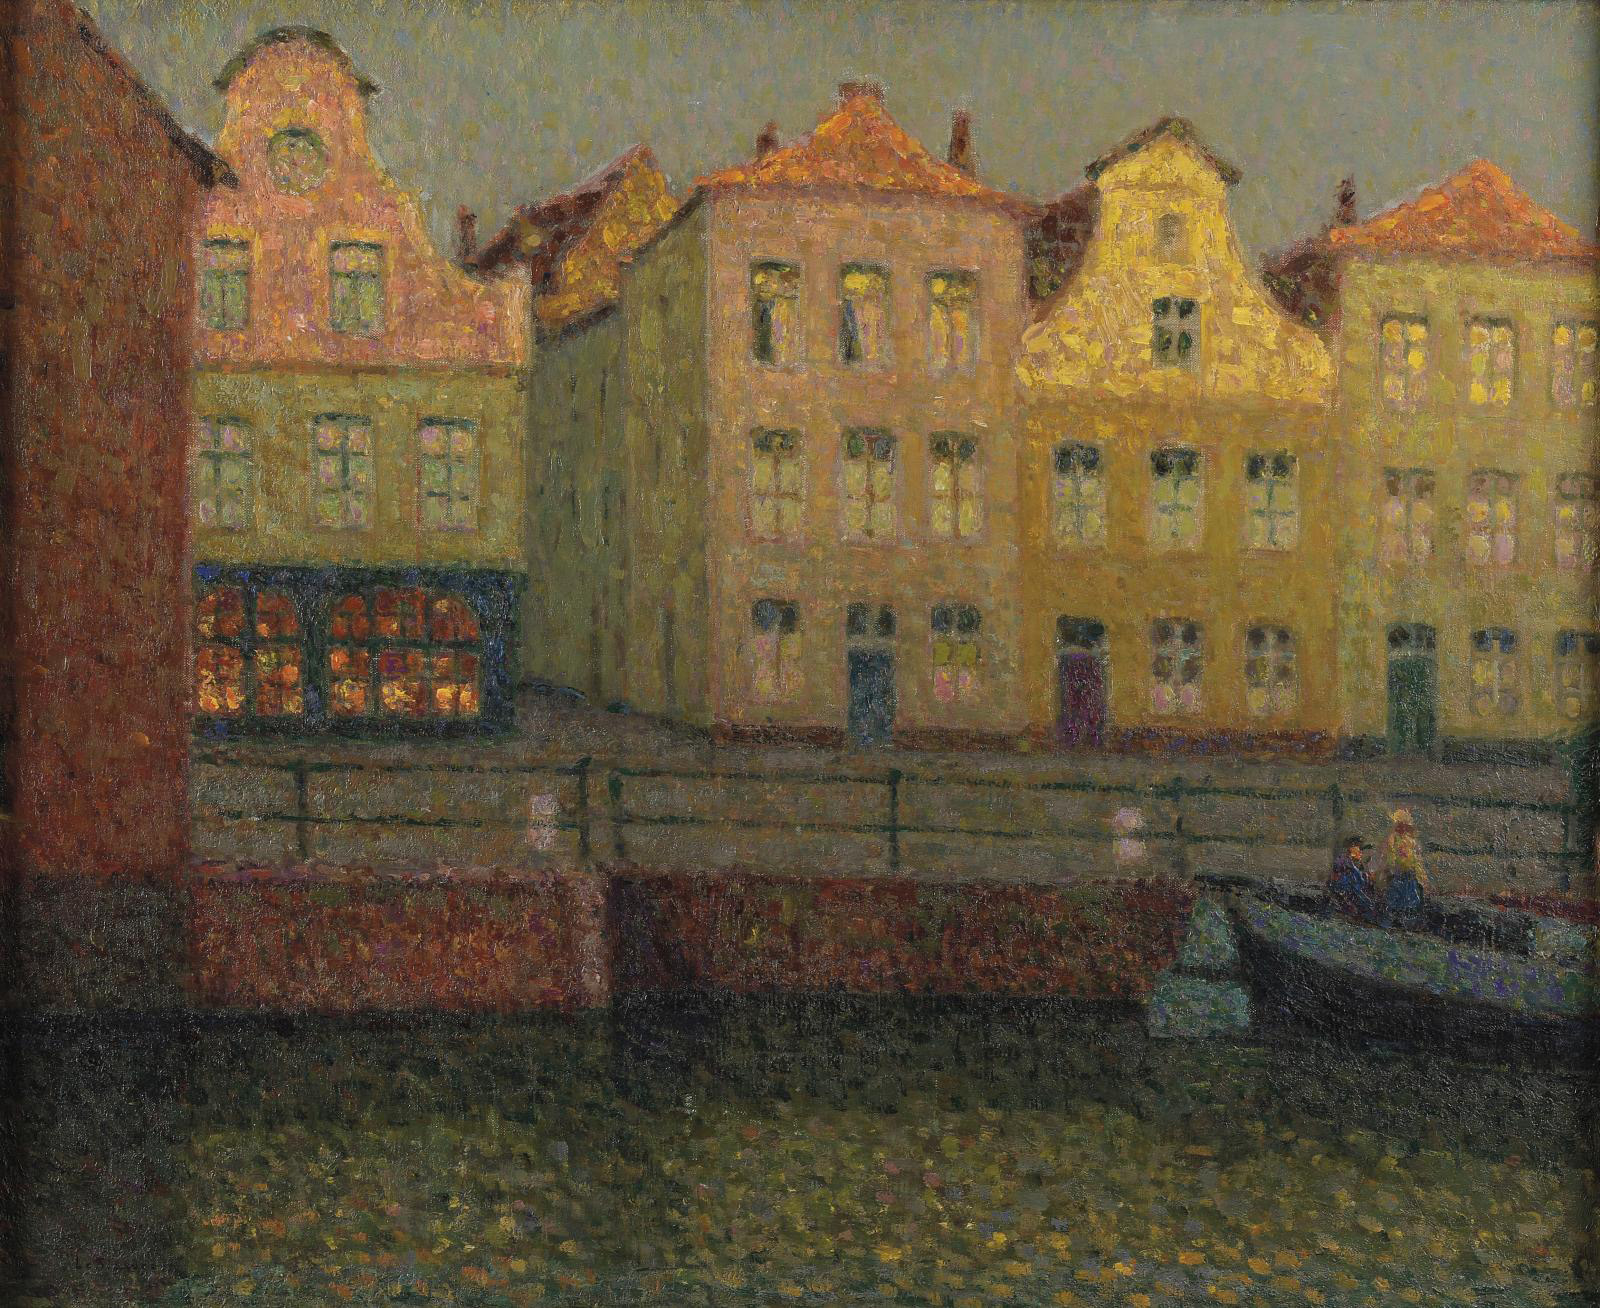 Time Stops with Henri Le Sidaner